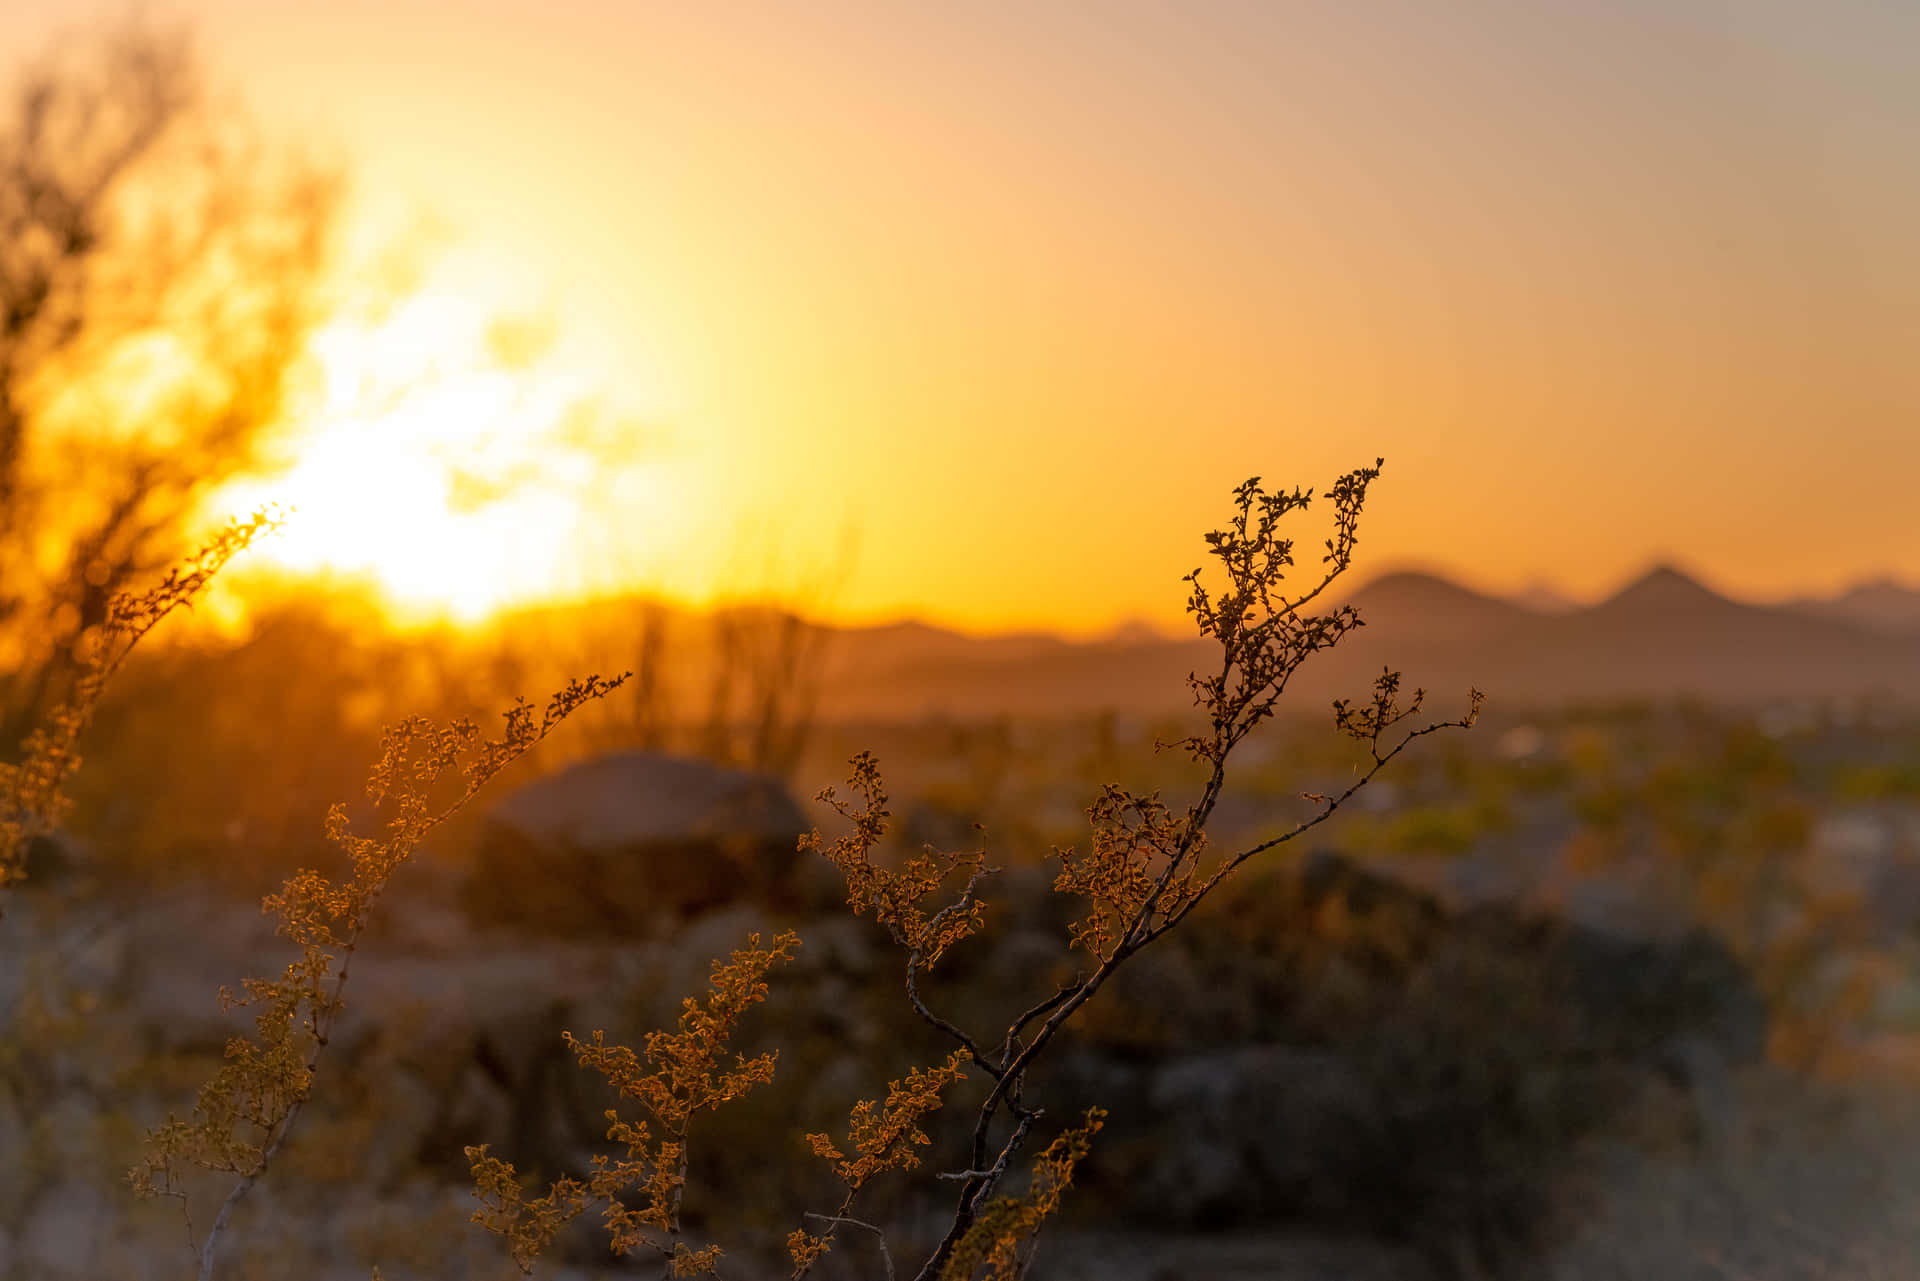 A Sunset In The Desert With A Brush In The Background